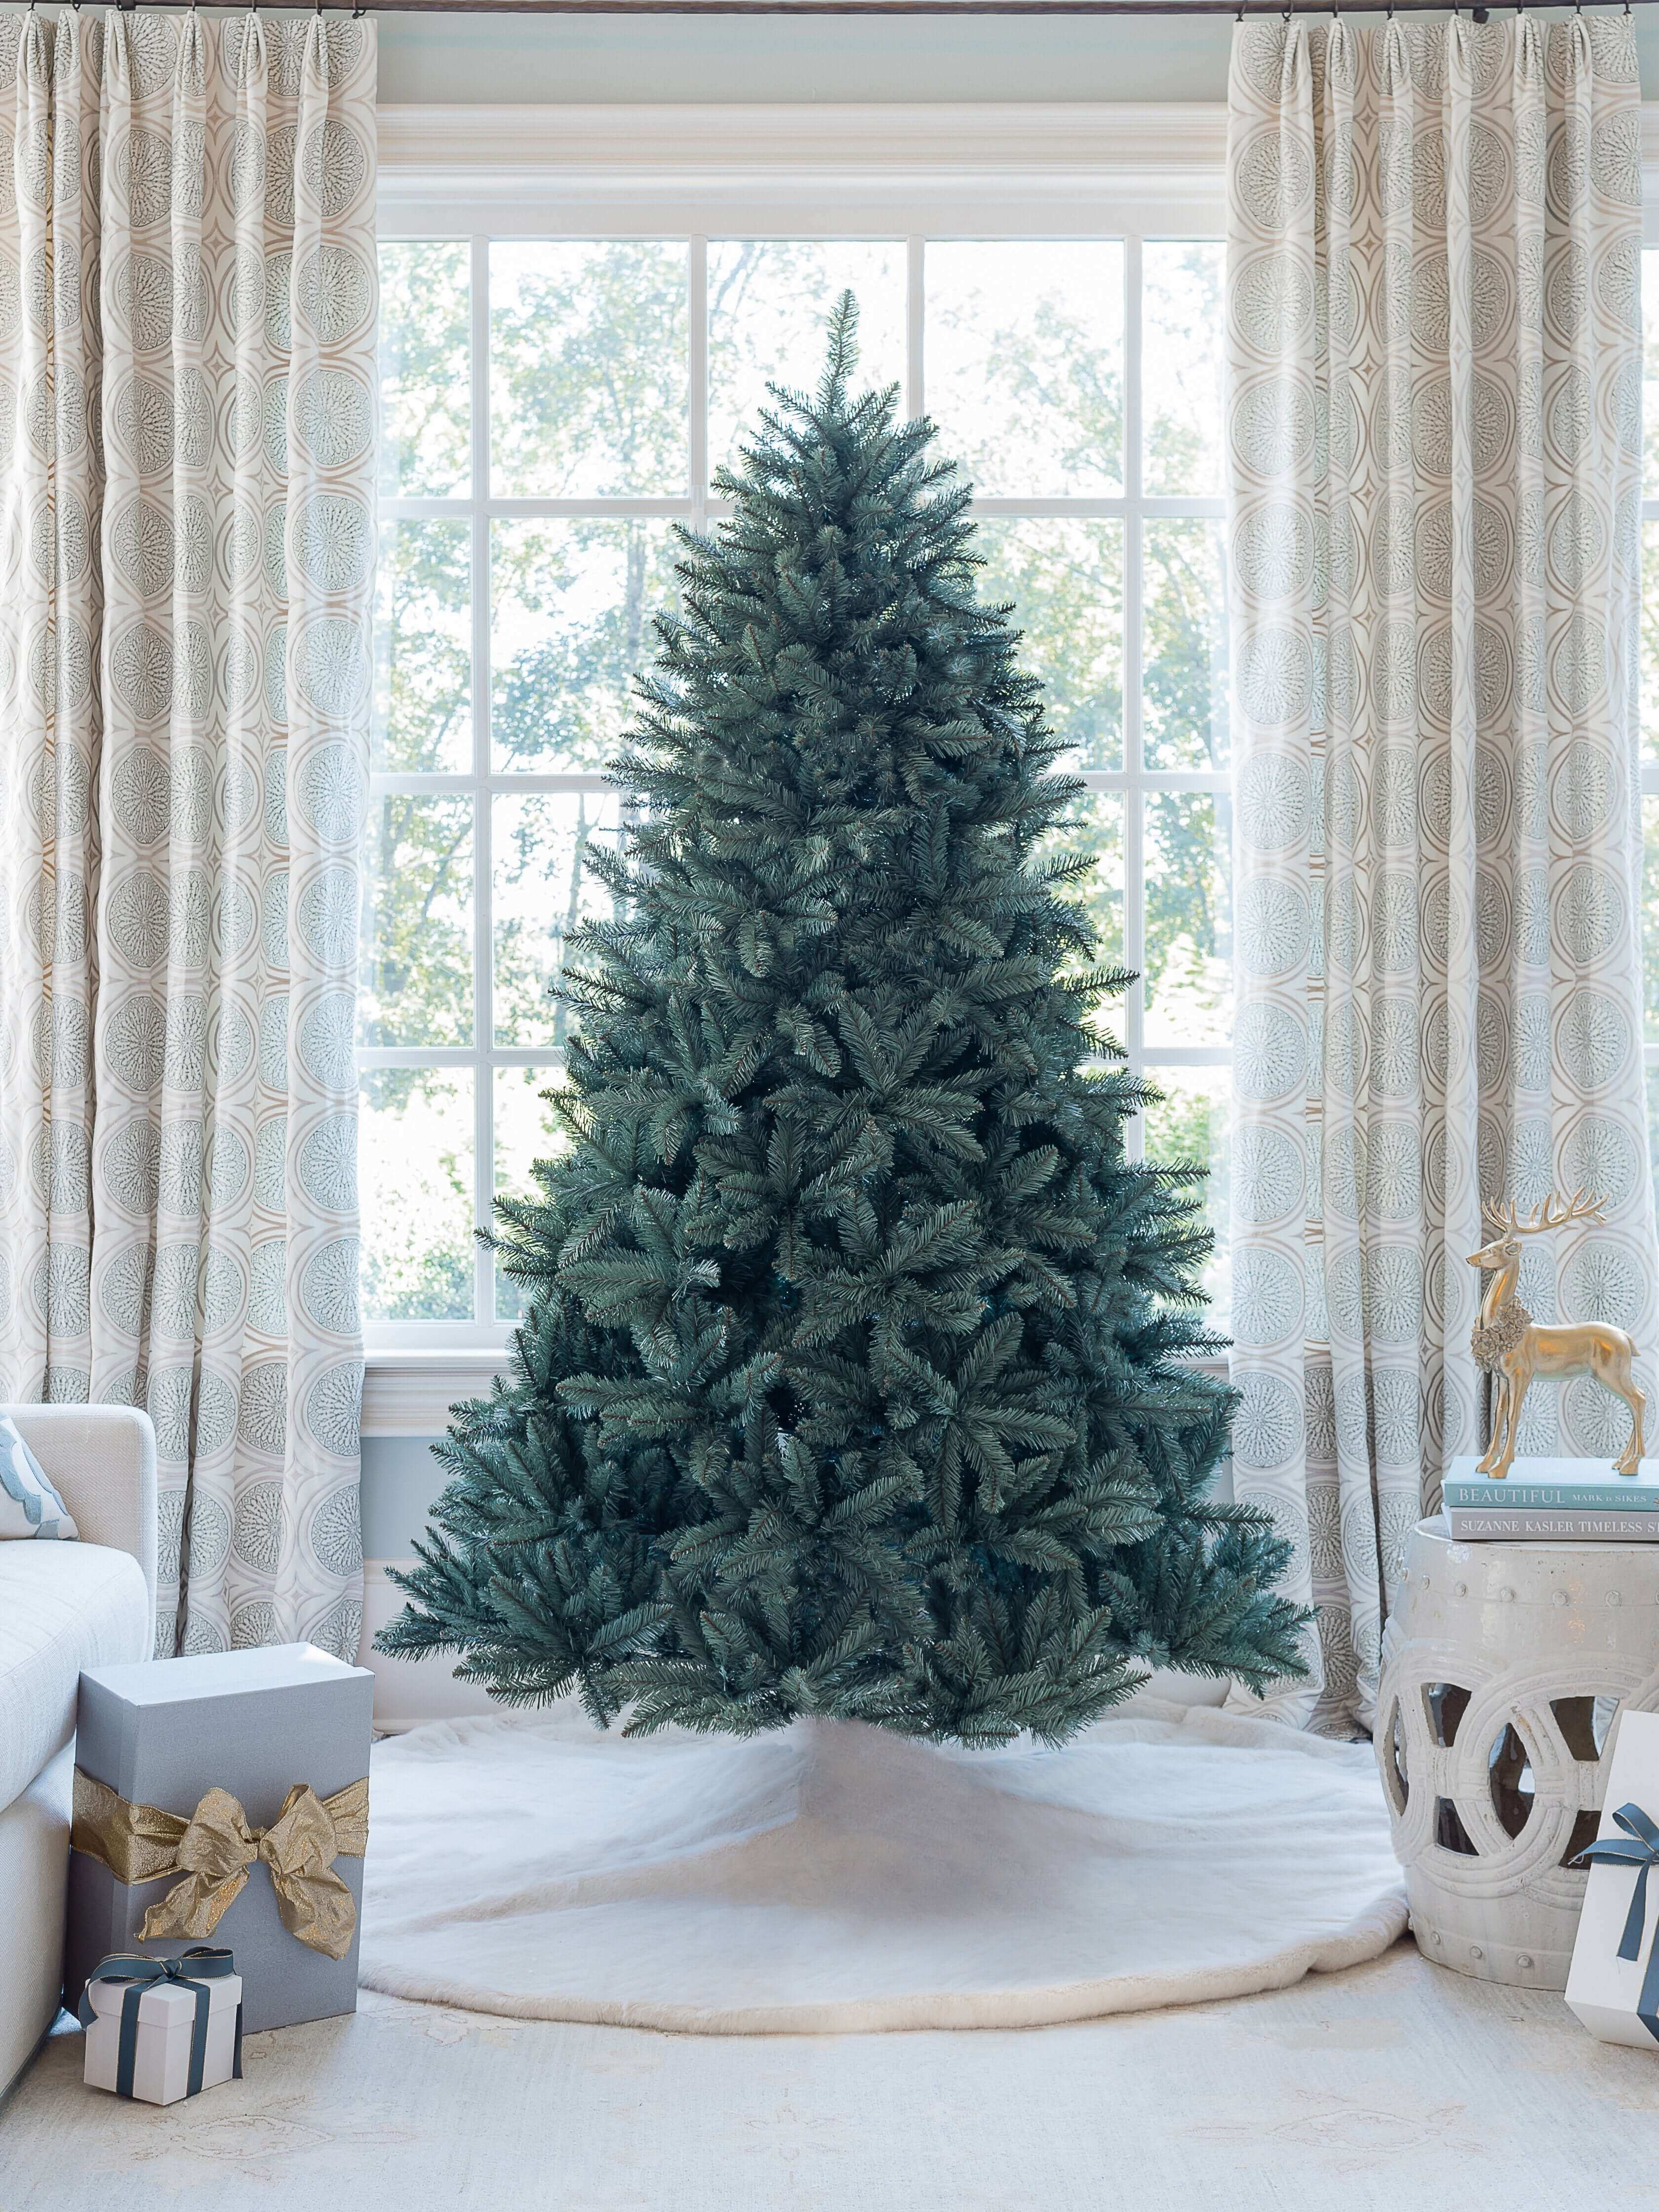 King of Christmas 7' Tribeca Spruce Blue Artificial Christmas Tree with 550 Warm White LED Lights